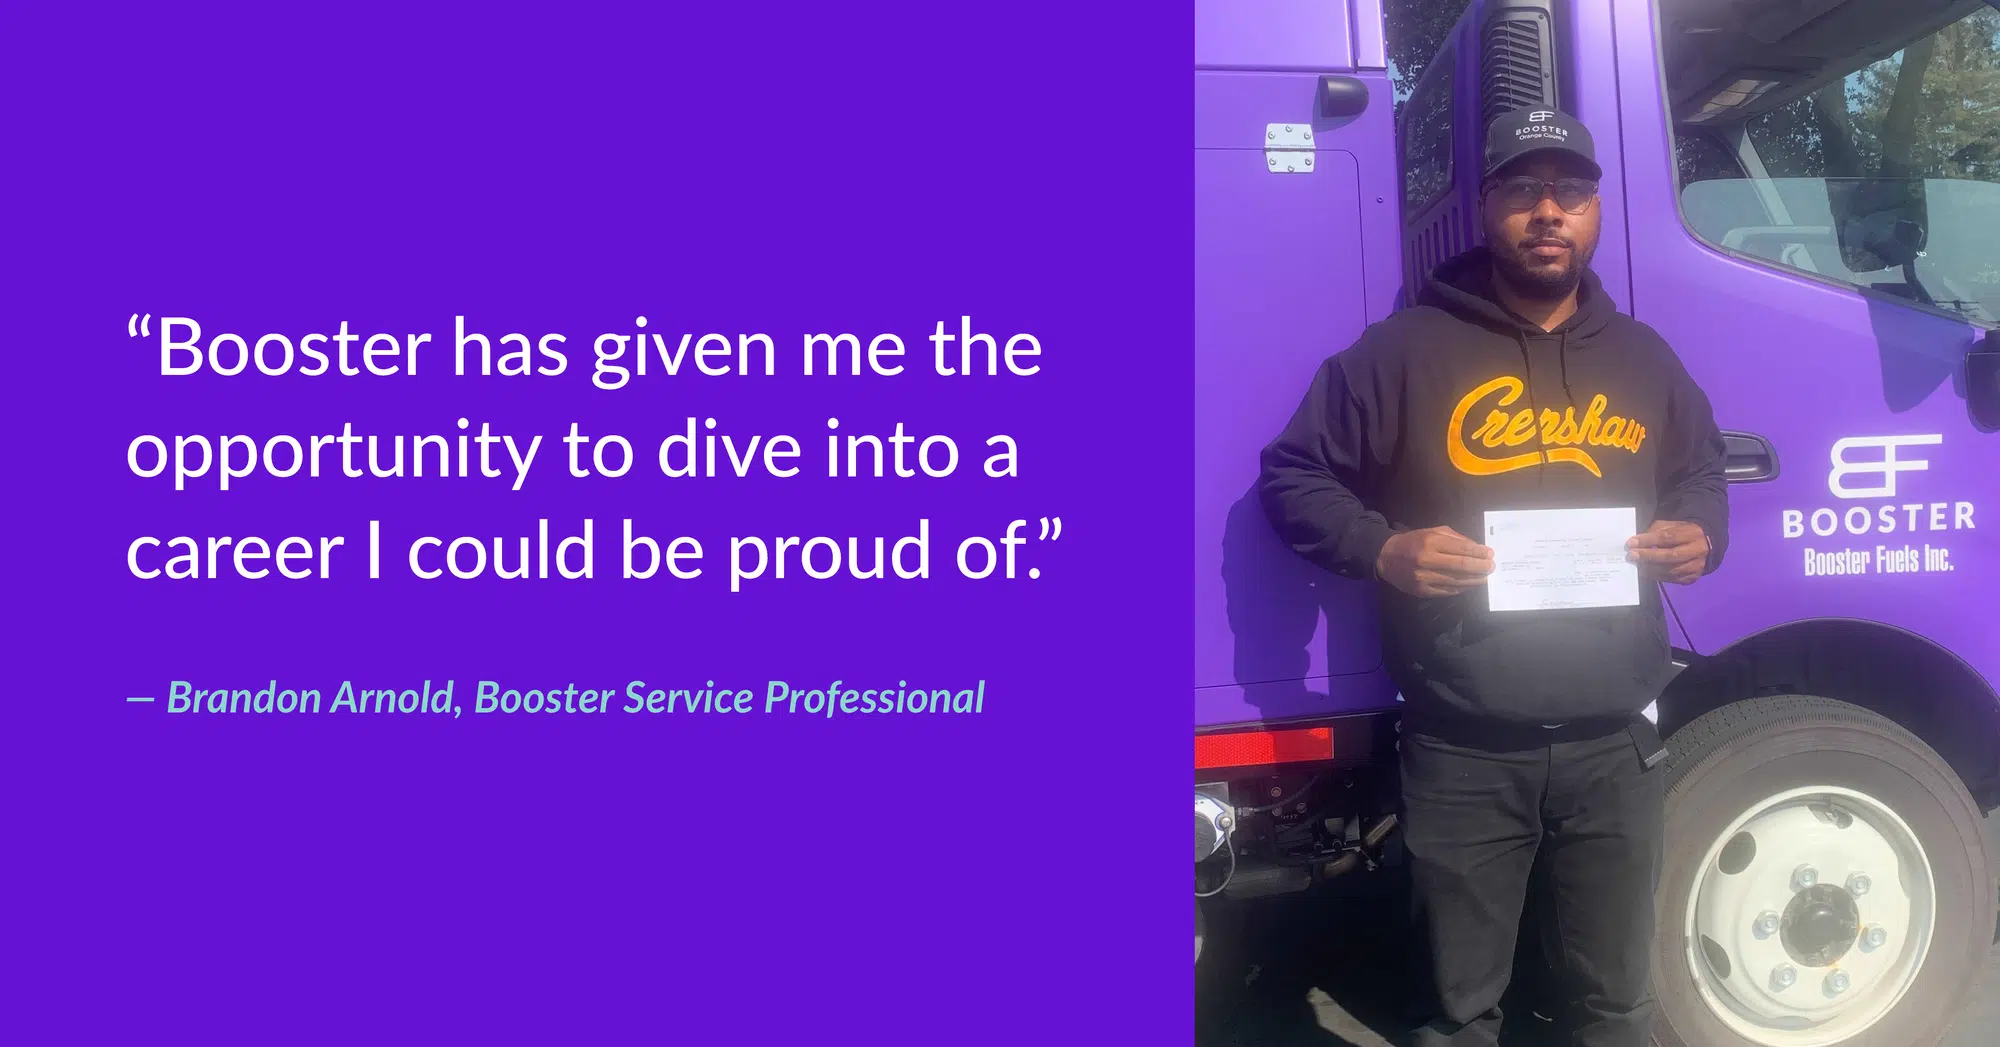 “Booster has given me the opportunity to dive into a career I could be proud of.” - Brandon Arnold, Booster Service Professional